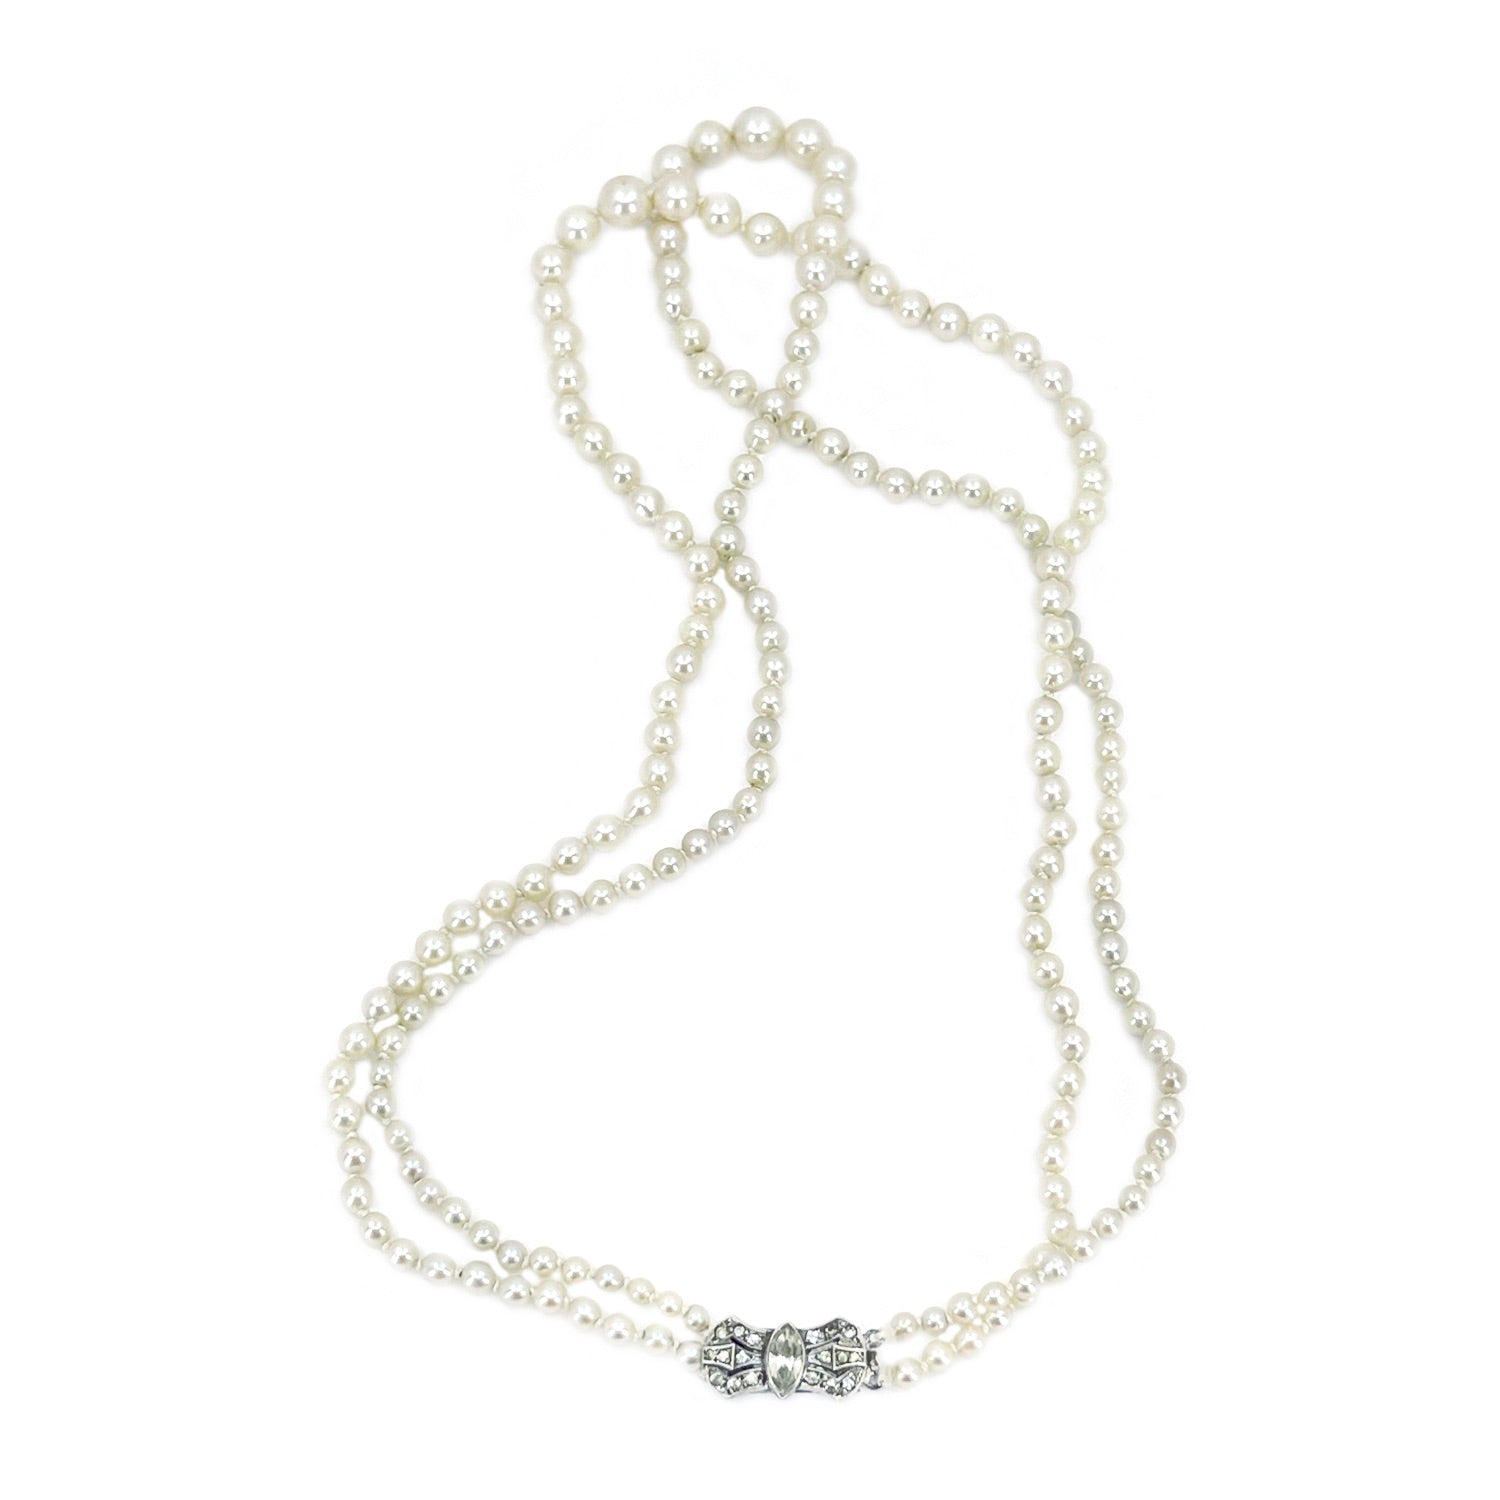 Art Deco Double Strand Japanese Cultured Akoya Pearl Paste Necklace -Sterling Silver 18 & 19 Inch